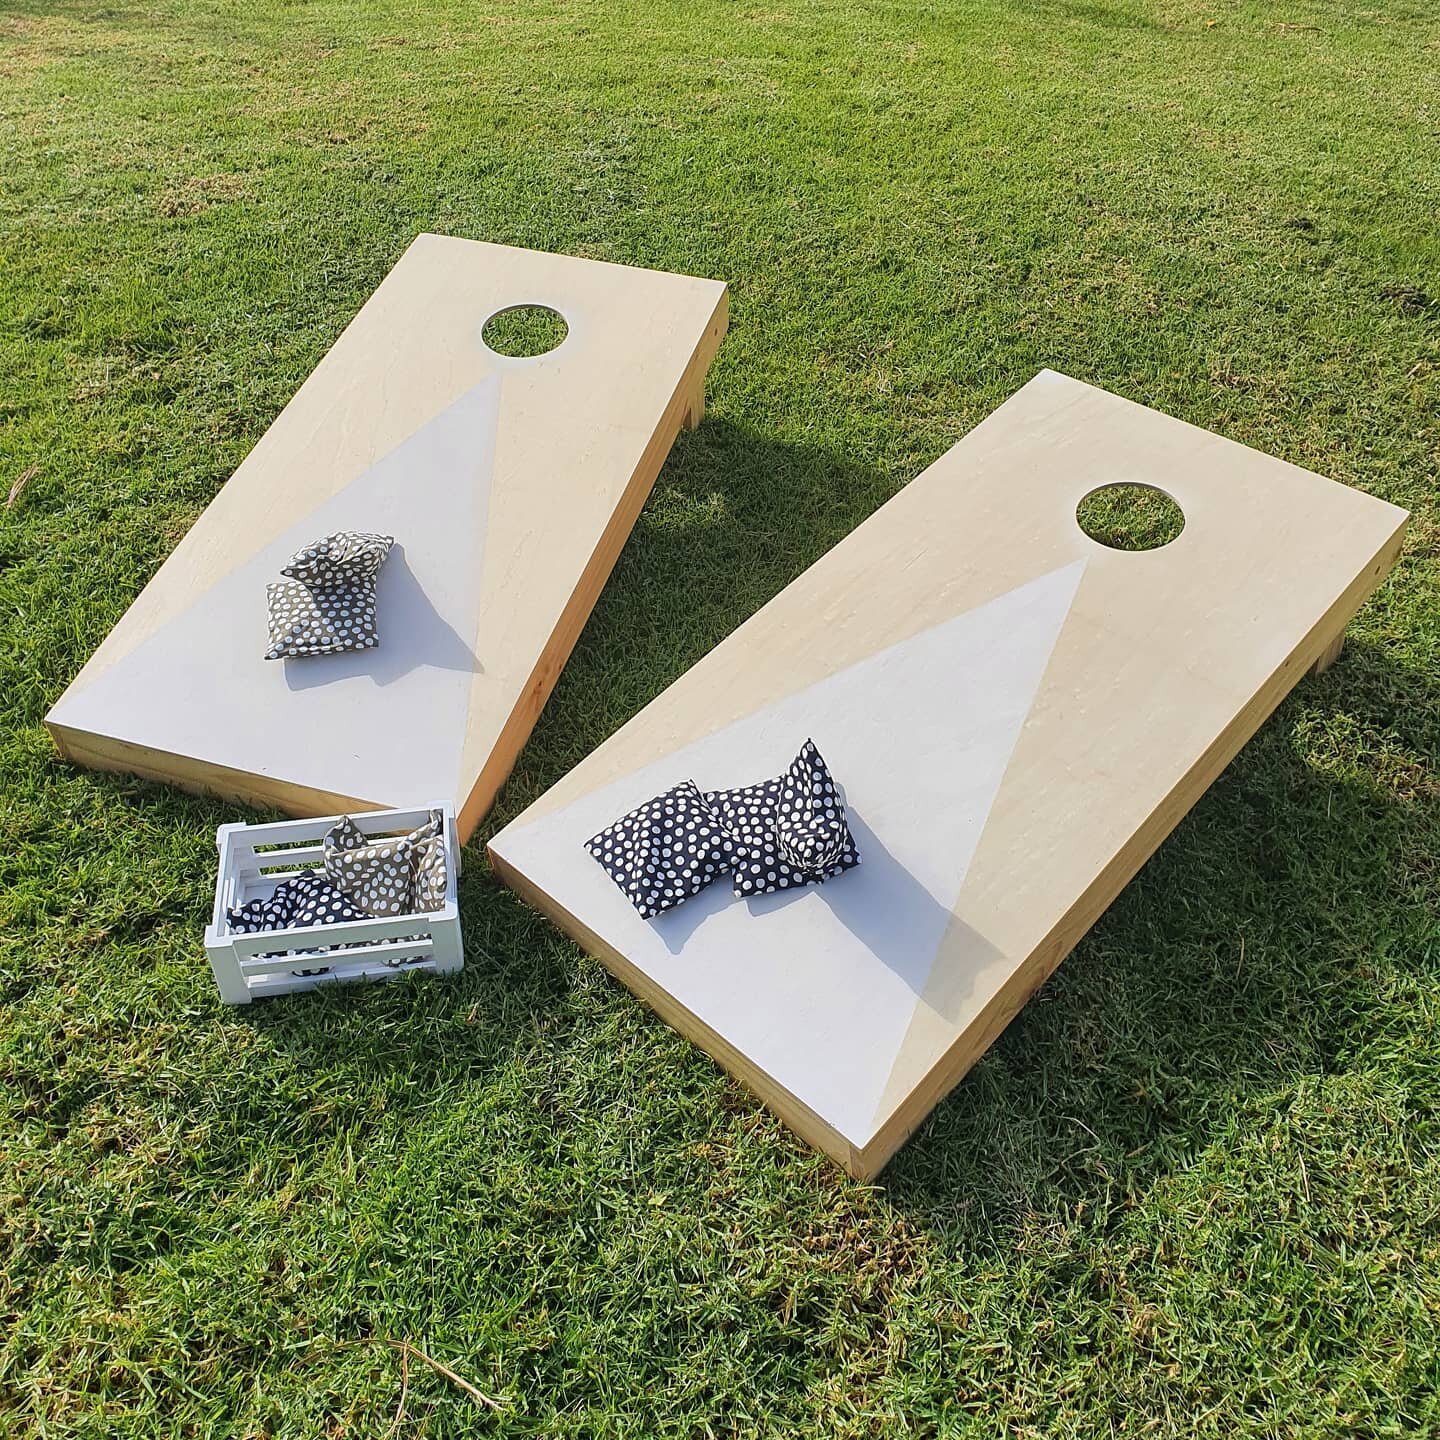 CORNHOLE // we've just added this beautiful game to our website.

A great way to entertain guests at your wedding or event.

Check it out at -  http://www.woodandwild.co.nz/lawn-games/cornhole